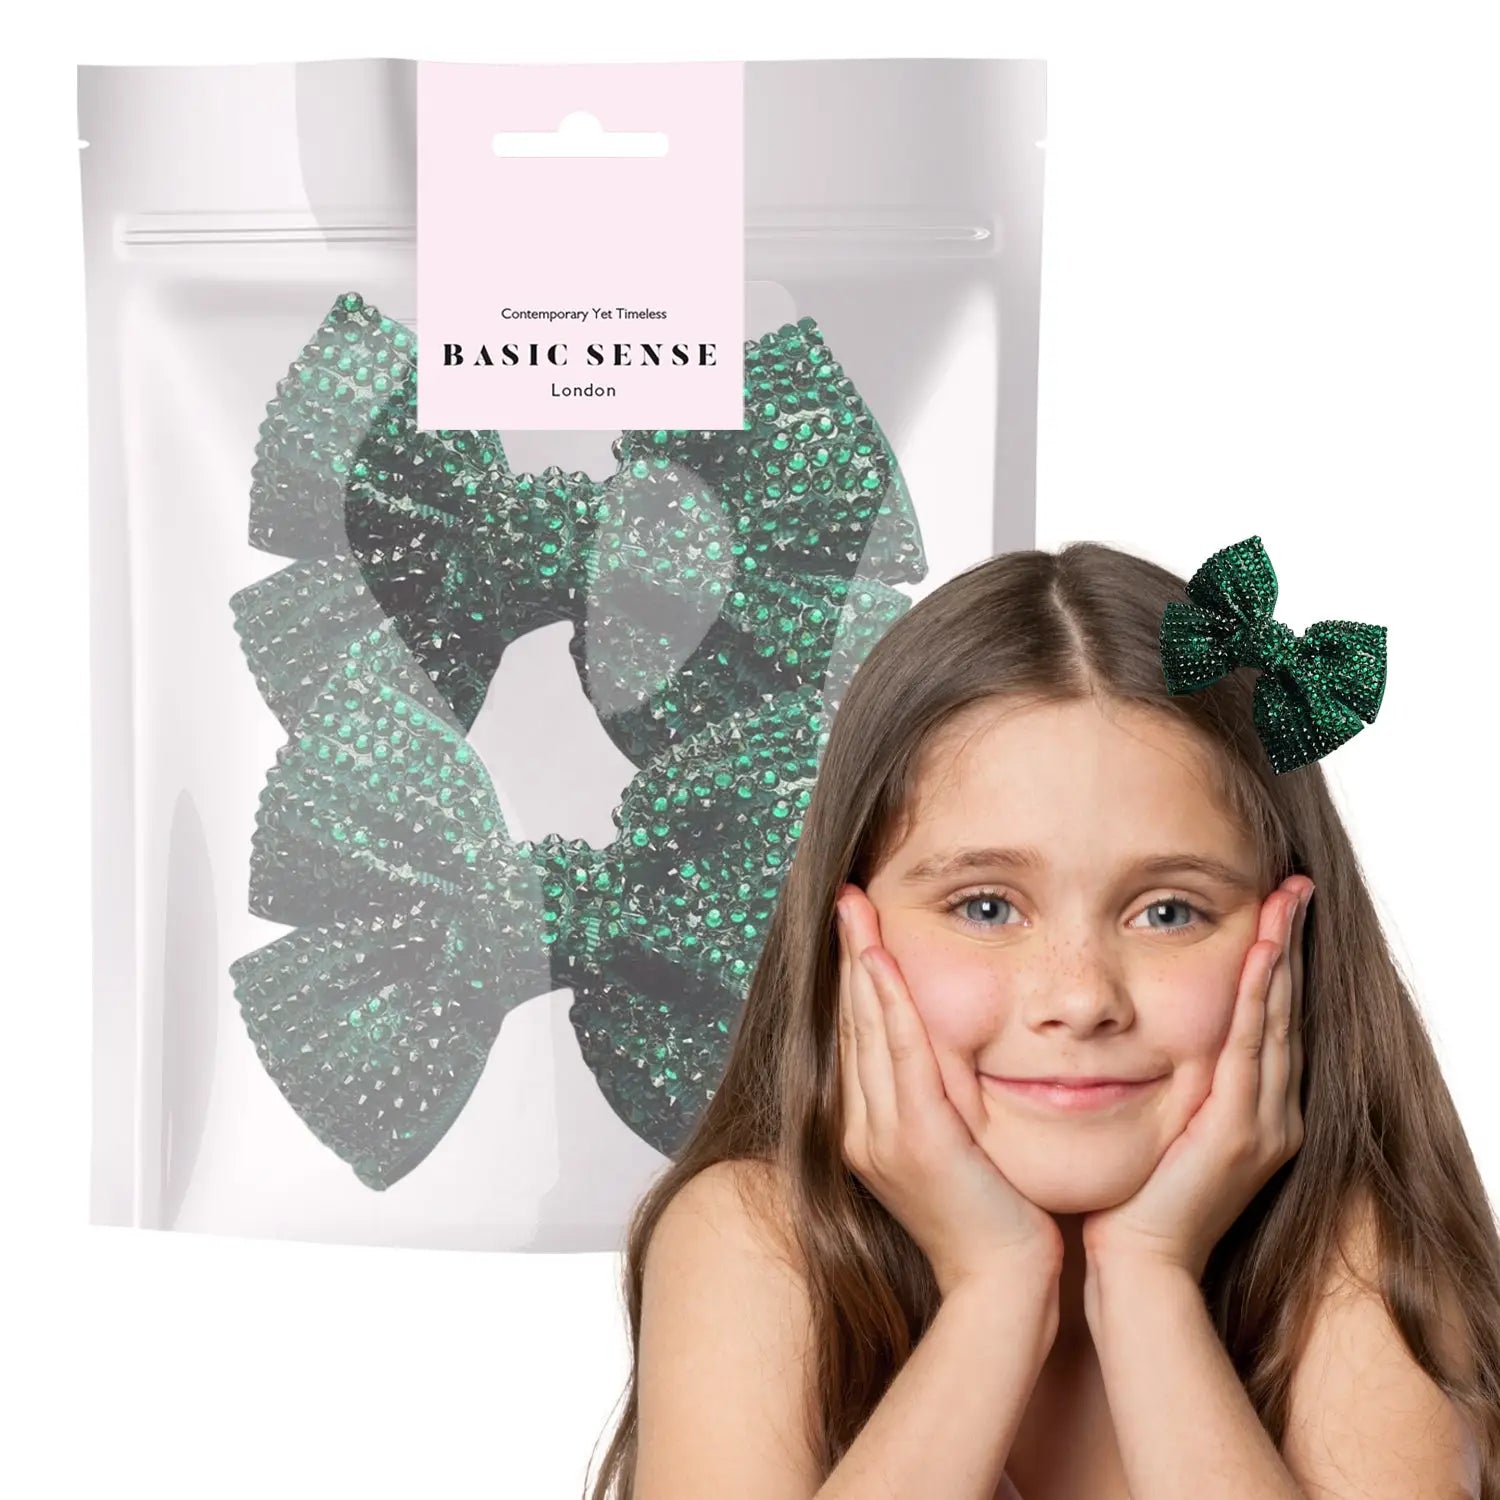 Young girl with hands on face holding bag of rhinestone ribbon alligator hair clips.